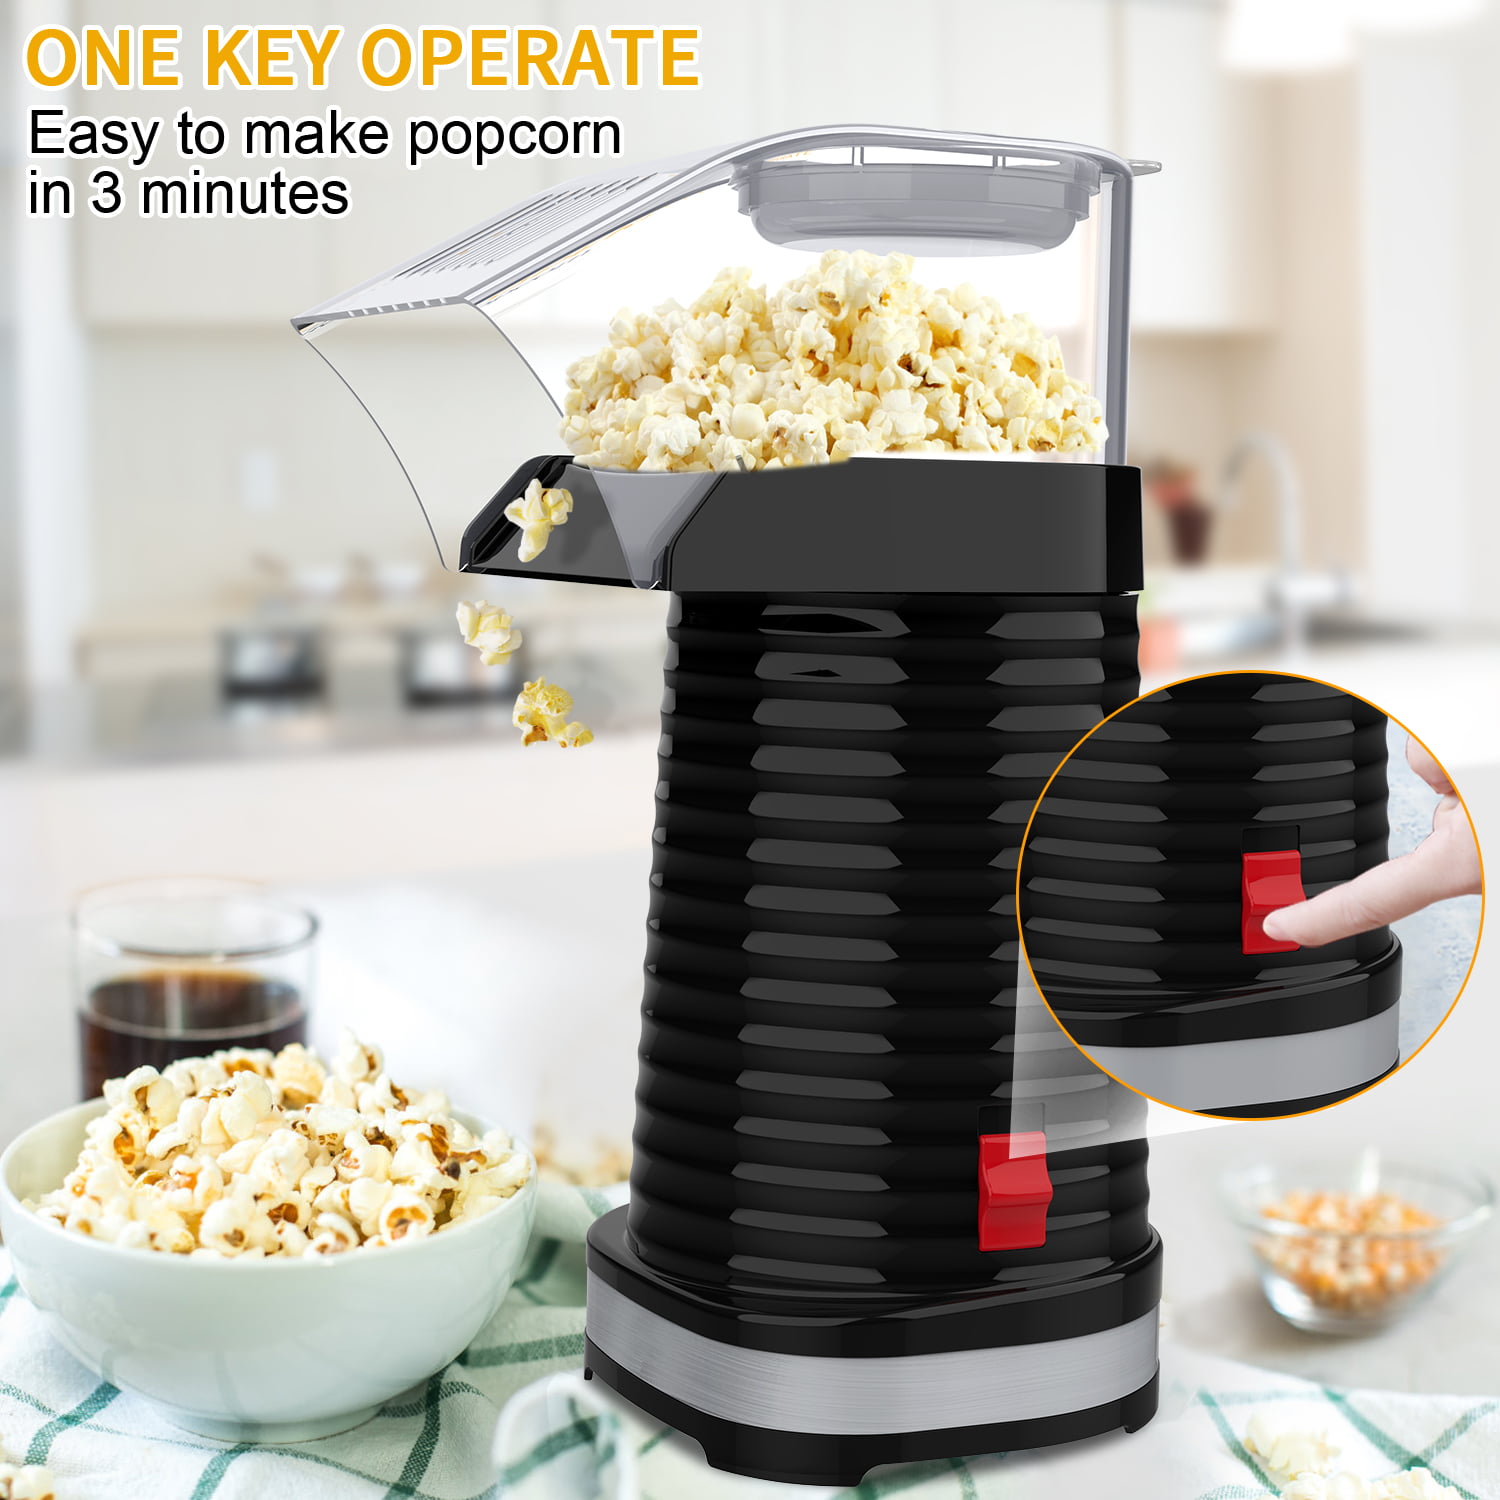 Sboly Popcorn Machine, 3 Minutes Fast No Oil Healthy Hot Air Popcorn Popper  for Kids Adults, Popcorn Maker Great for Party and Watching Movies, 1200W,  Red 